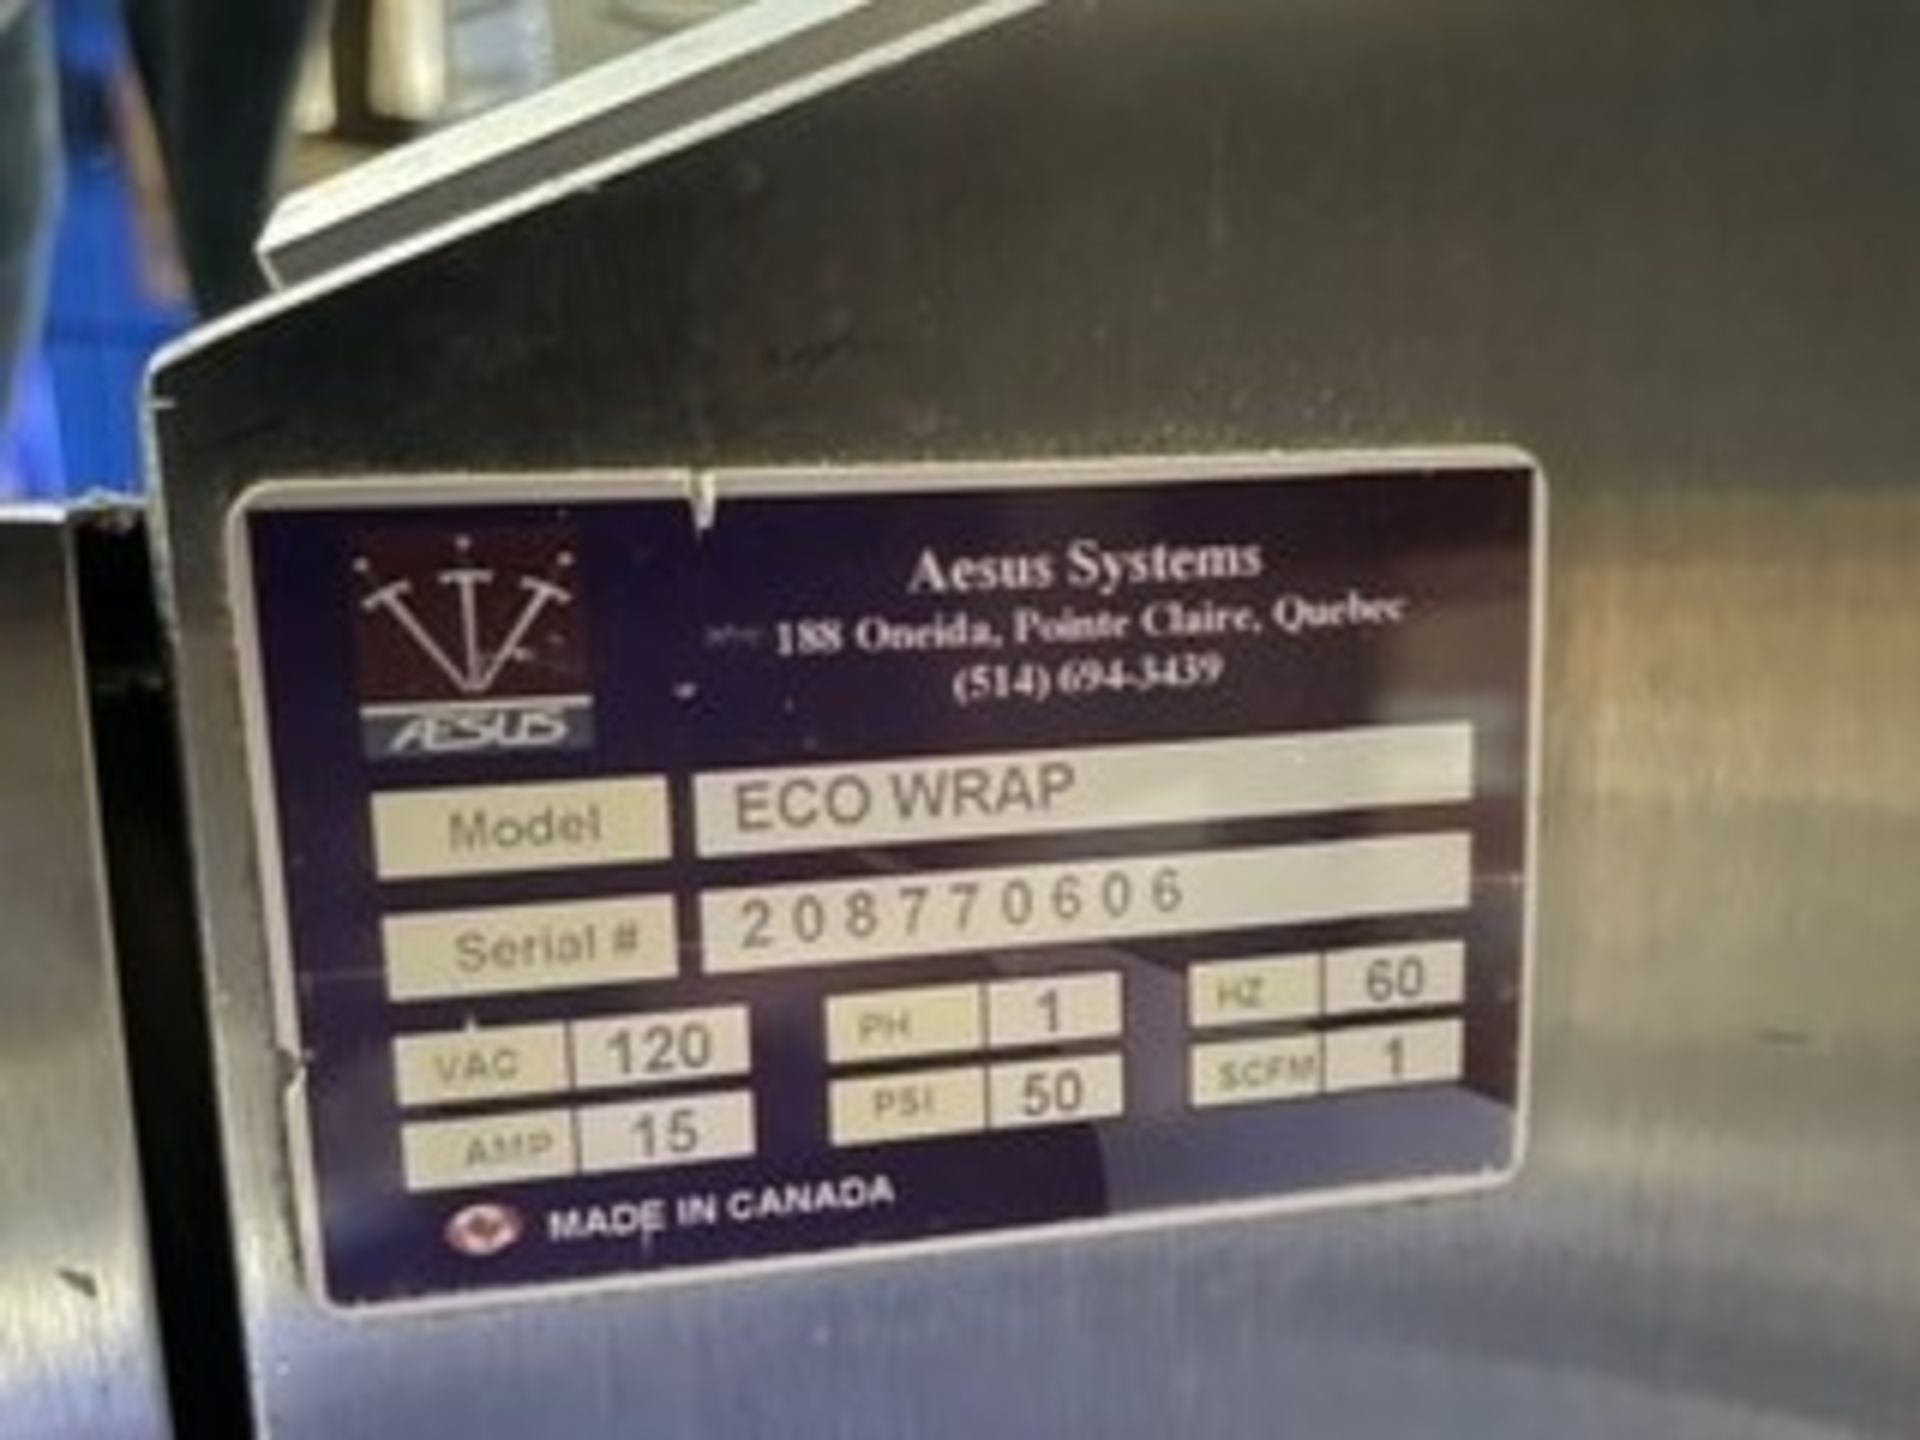 Aesus Systems Labeler, Model ECO WRAP, S/N 208770605 (Loading Fee $350) (Located Haleah, FL) - Image 2 of 2